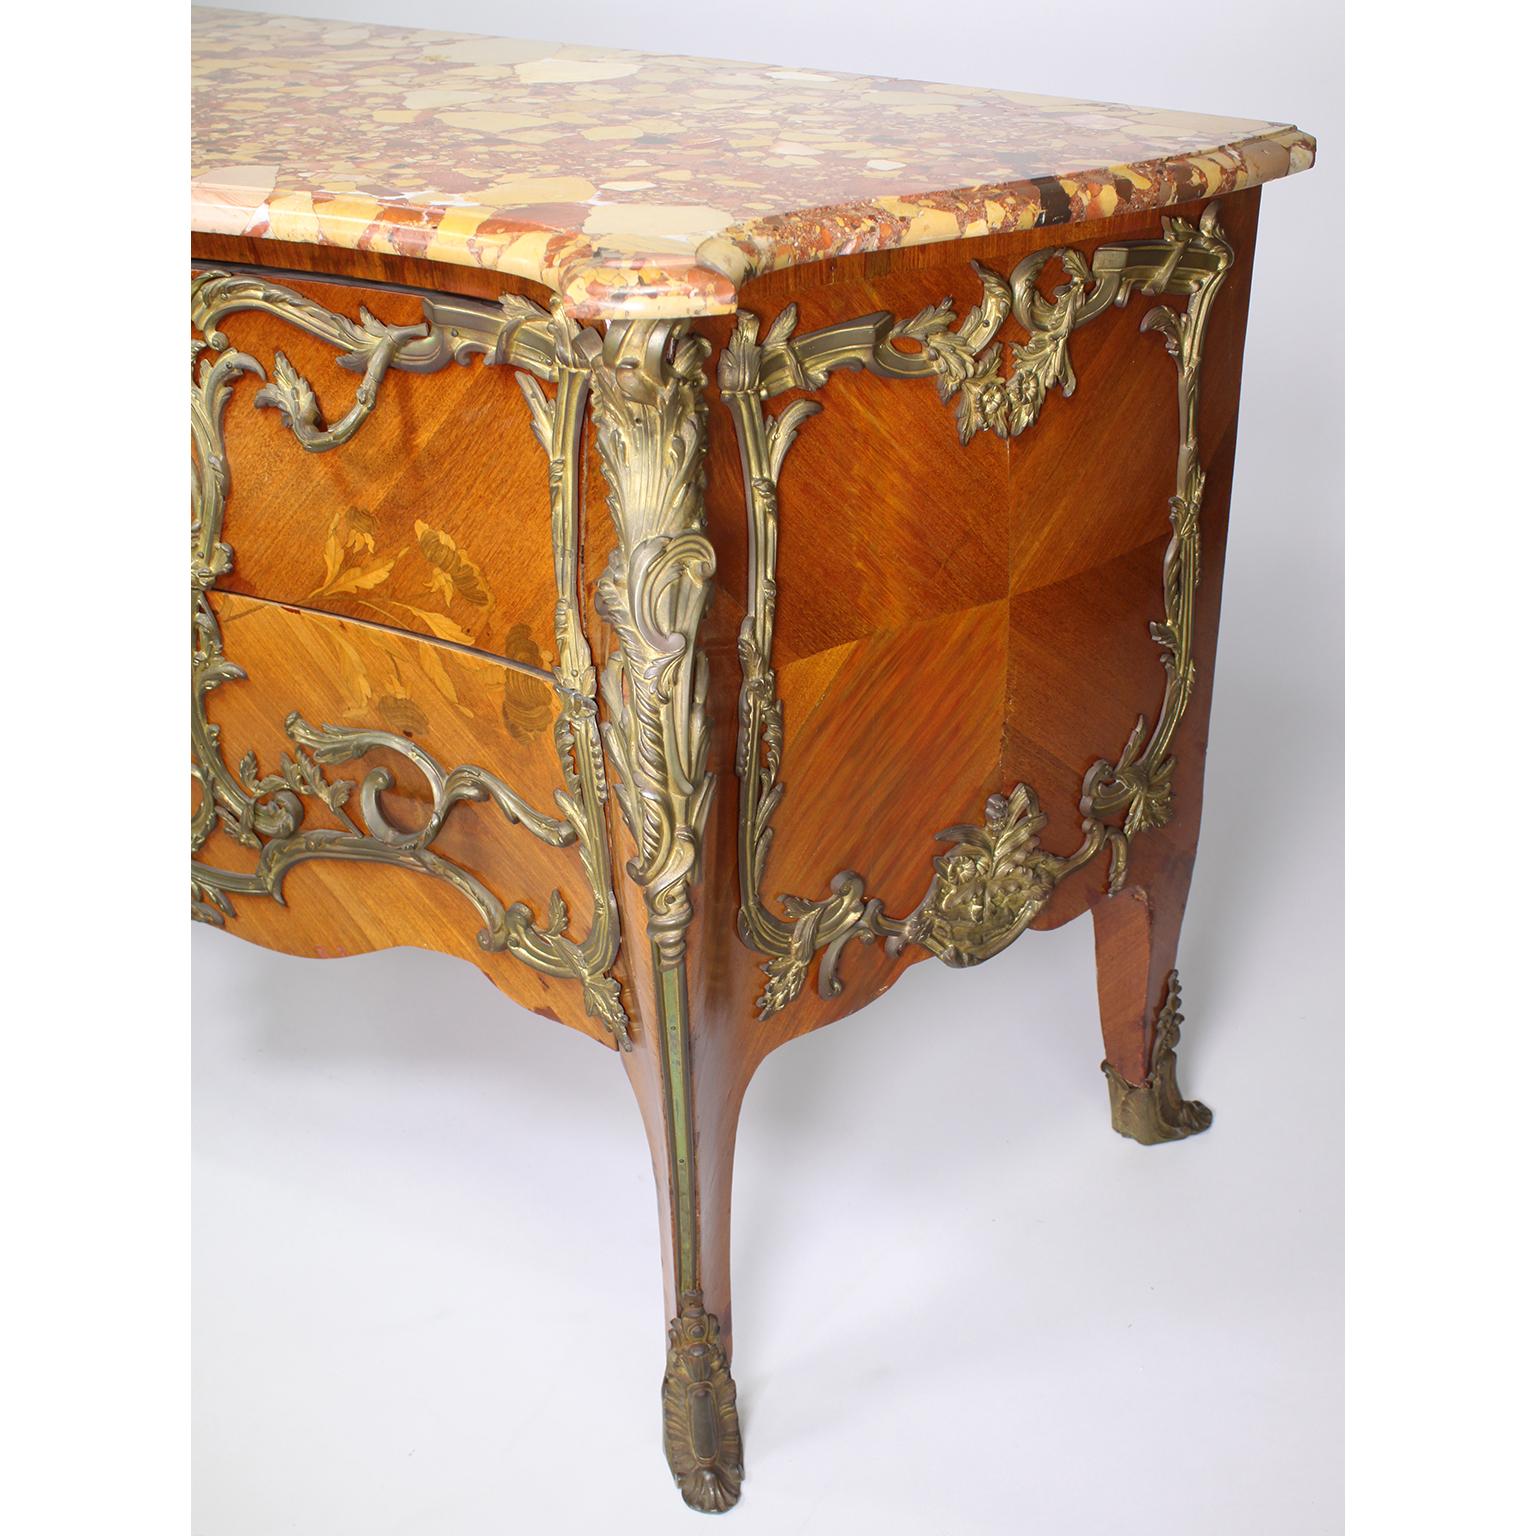 French 19th/20th Century Louis XV Style Gilt-Bronze Mounted Commode Marble Top For Sale 2